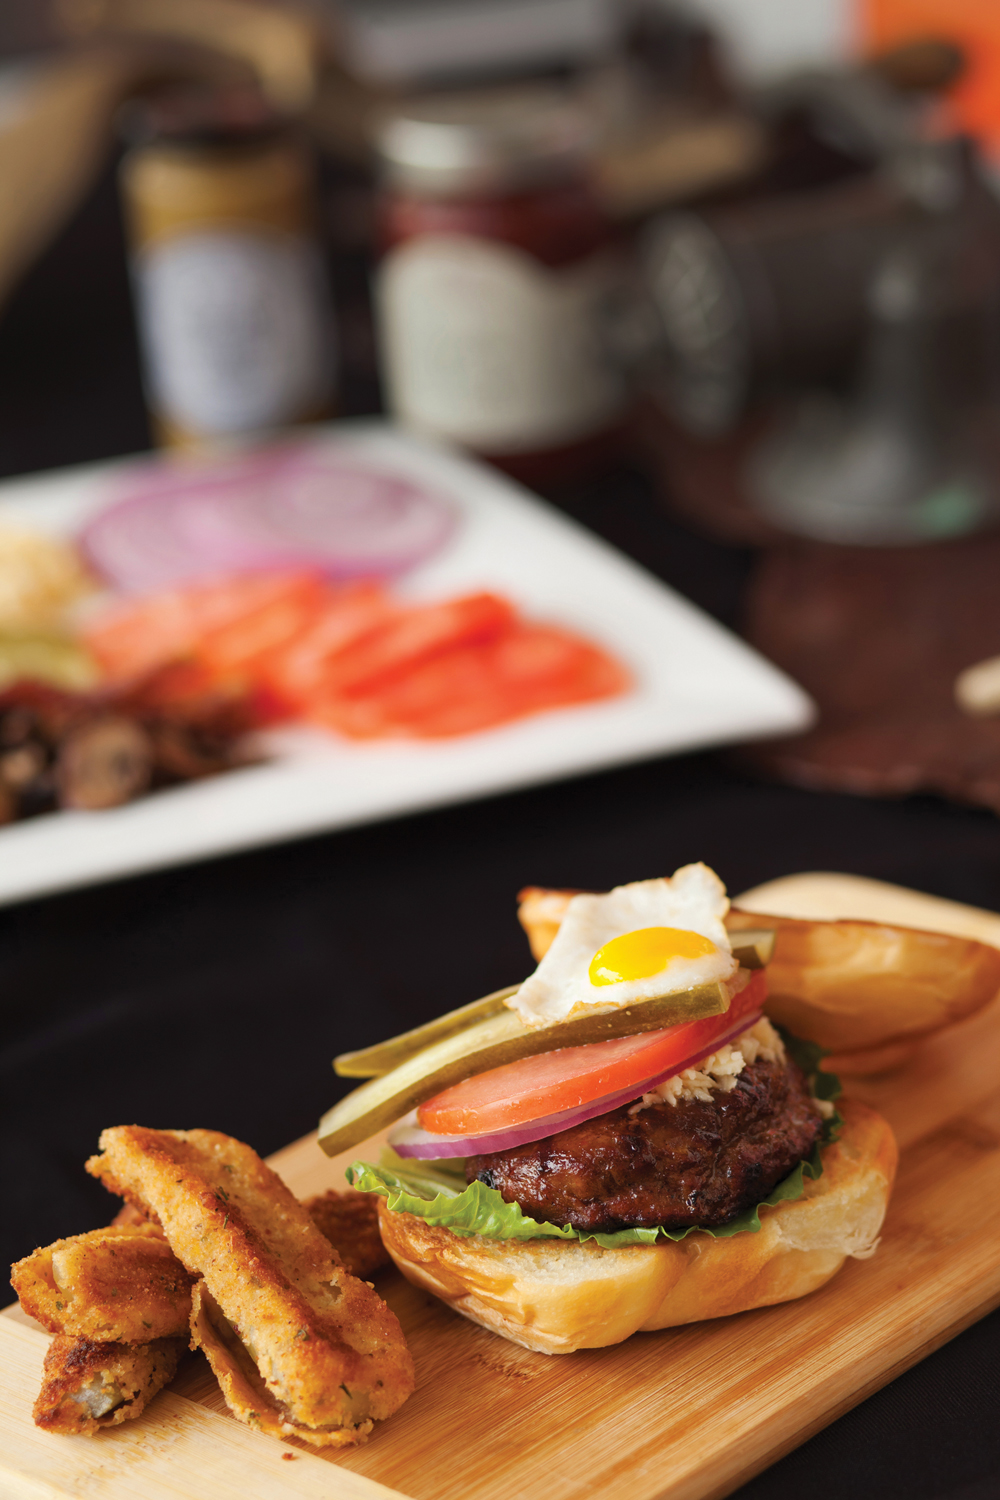 A Black Angus chipotle bison burger with lettuce, tomato, pickles, onion, cheese and a fried quail egg, with deep fried pickles on the side.